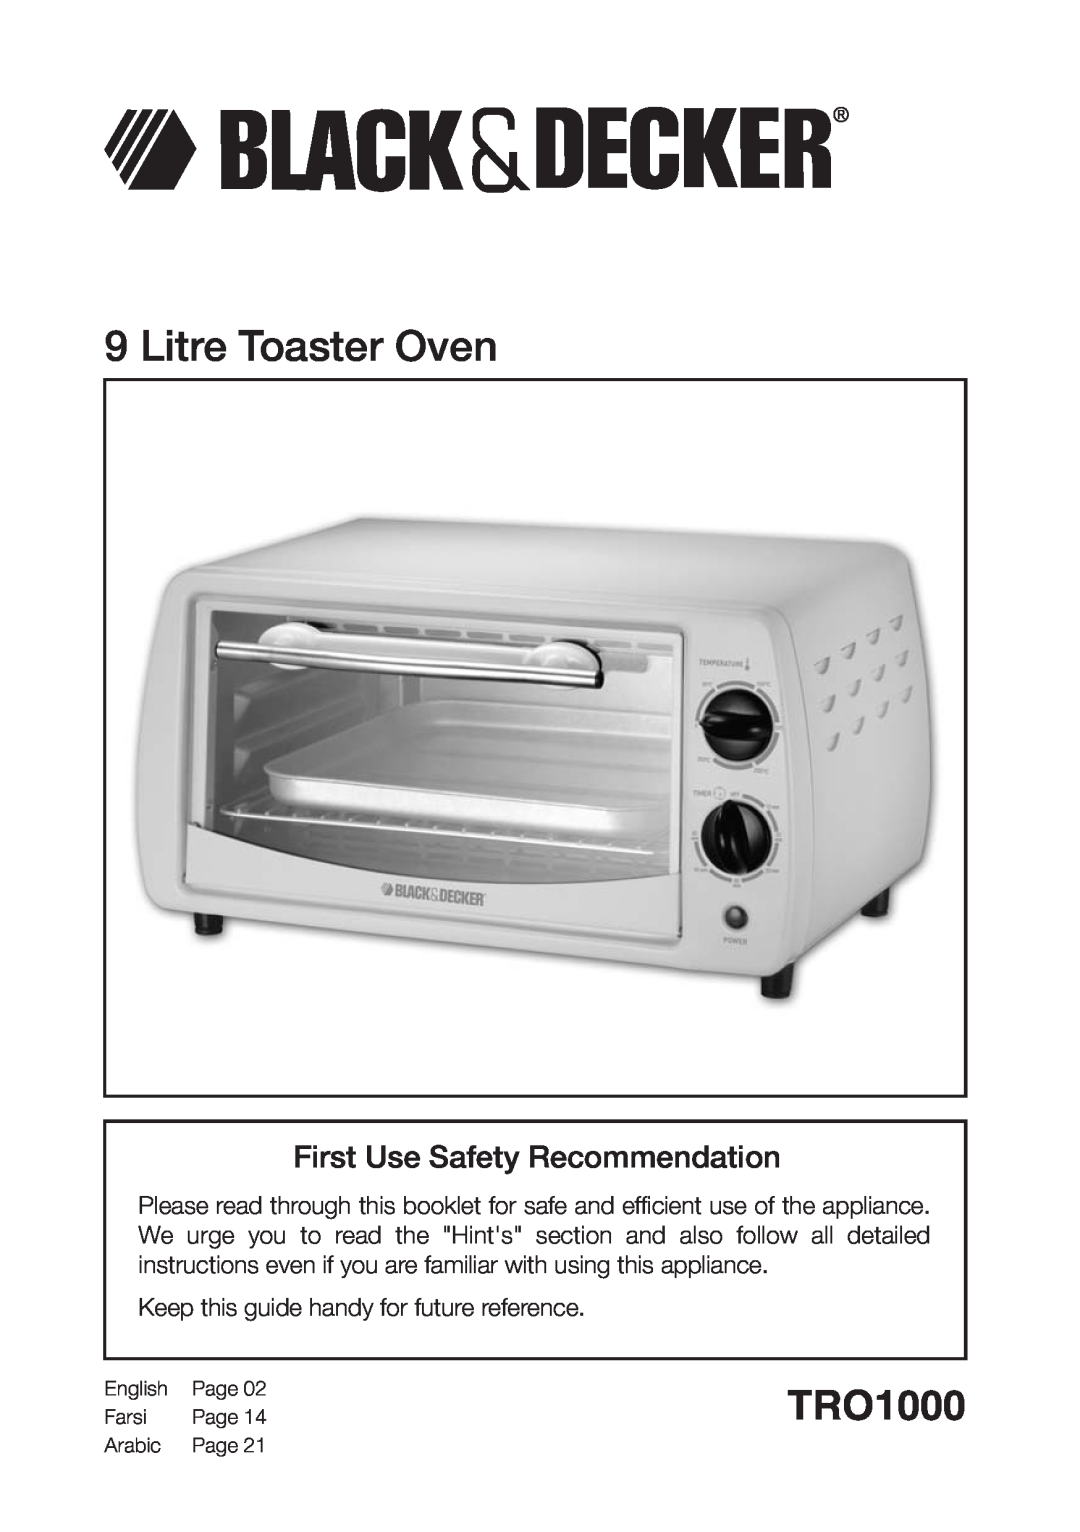 Black & Decker TRO1000 manual First Use Safety Recommendation, Litre Toaster Oven 